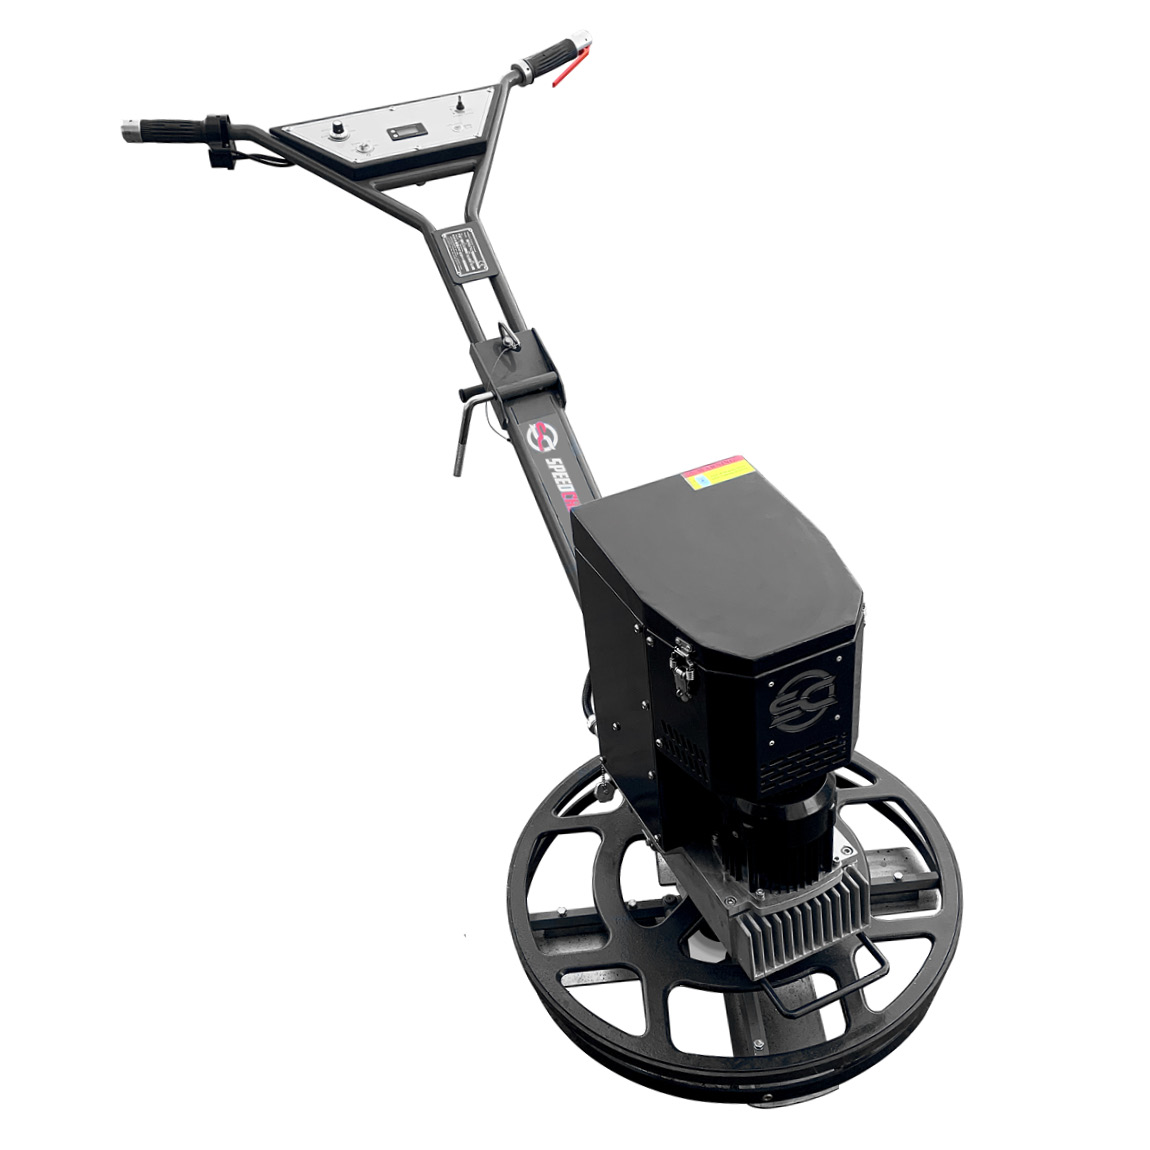 The new battery powered edging trowel available in the United Kingdom via Speedcrete. These walk-behind concrete finishing edgers are used in environments where fumes and high noise levels need to be a safety consideration. 